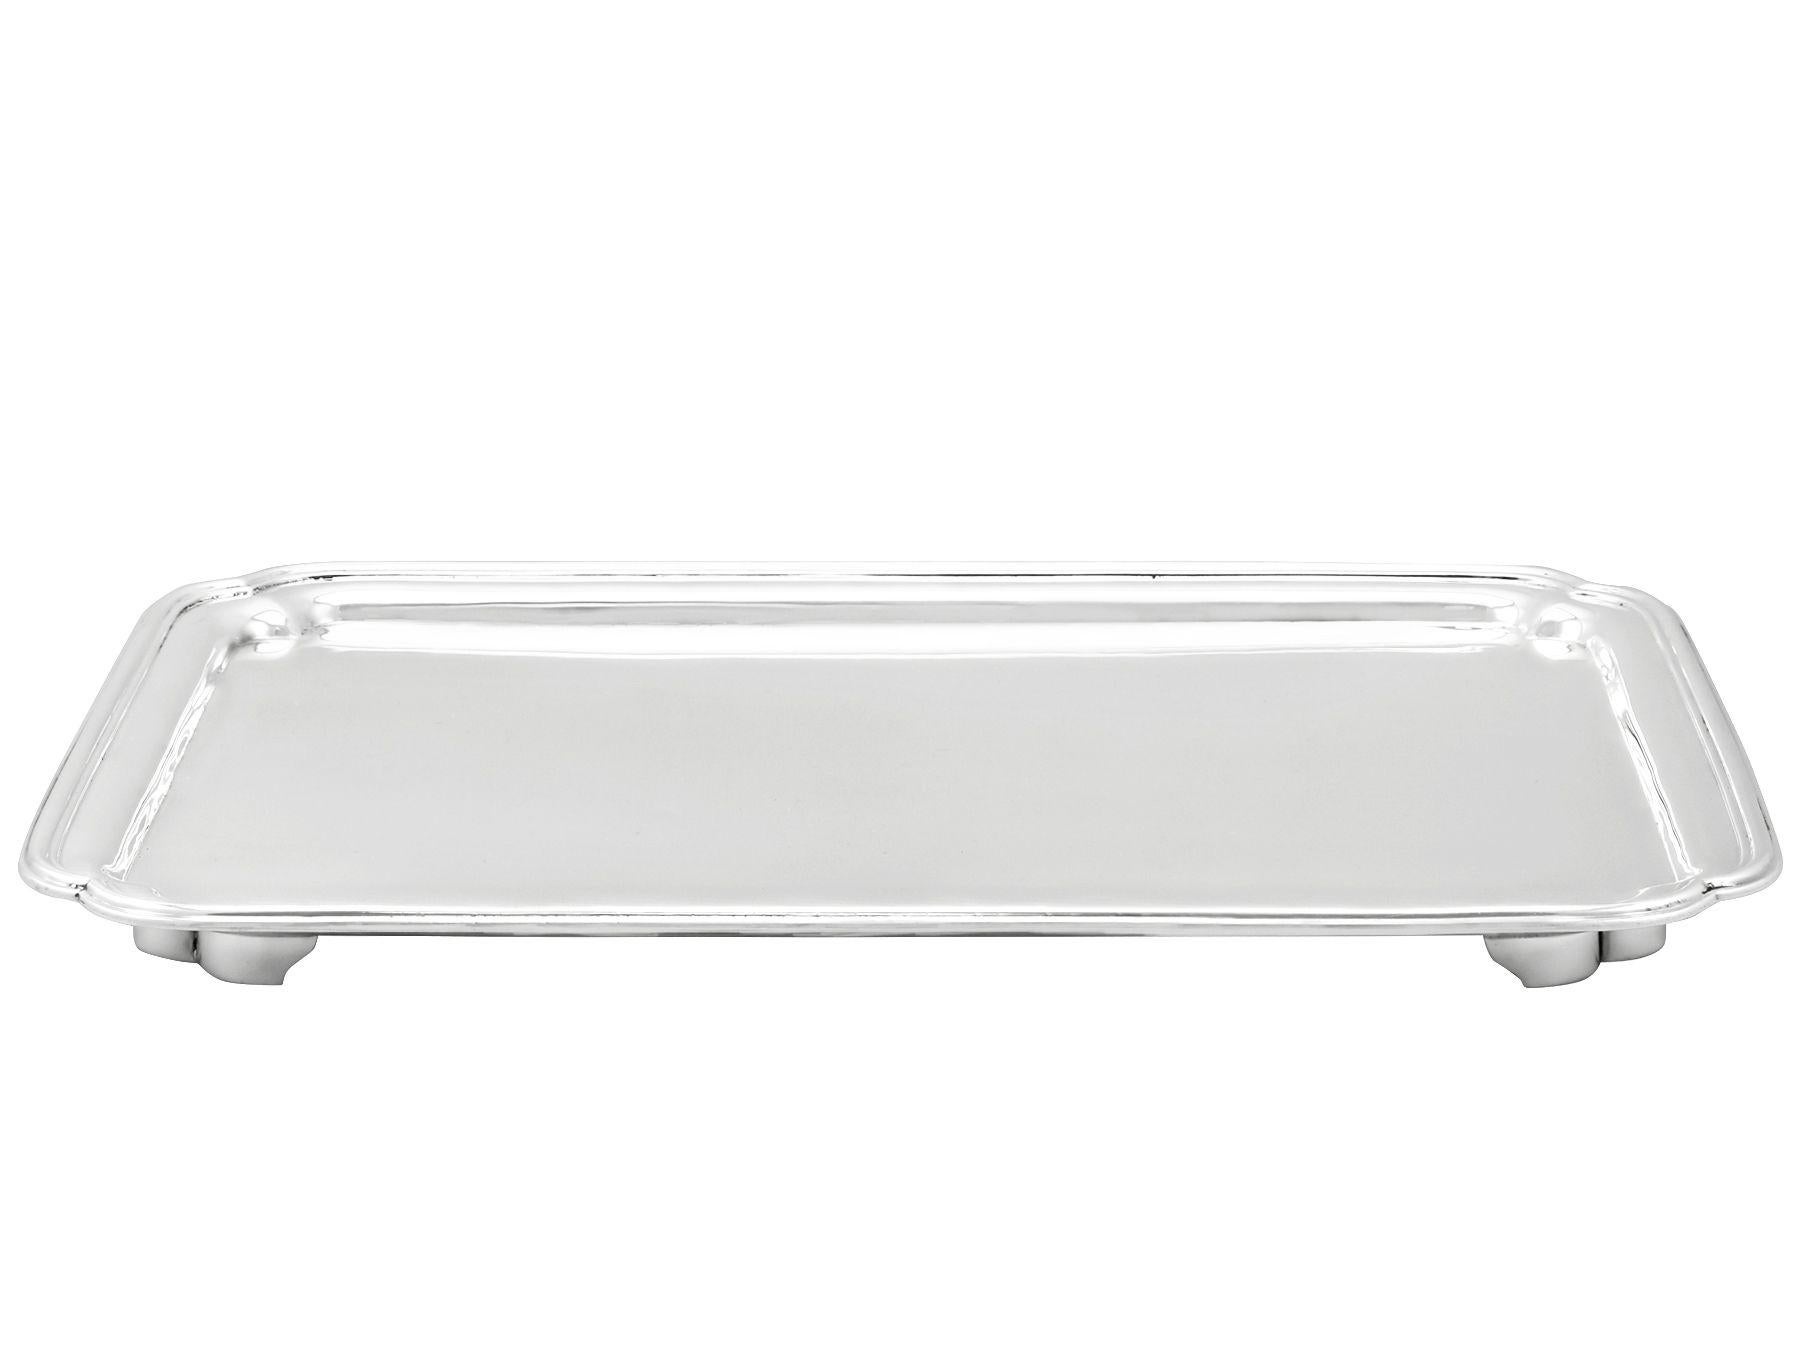 An exceptional, fine and impressive antique Art Deco English sterling silver salver, an addition to our dining silverware collection.

This exceptional antique George V sterling silver salver has a plain rectangular form with incurved shaped